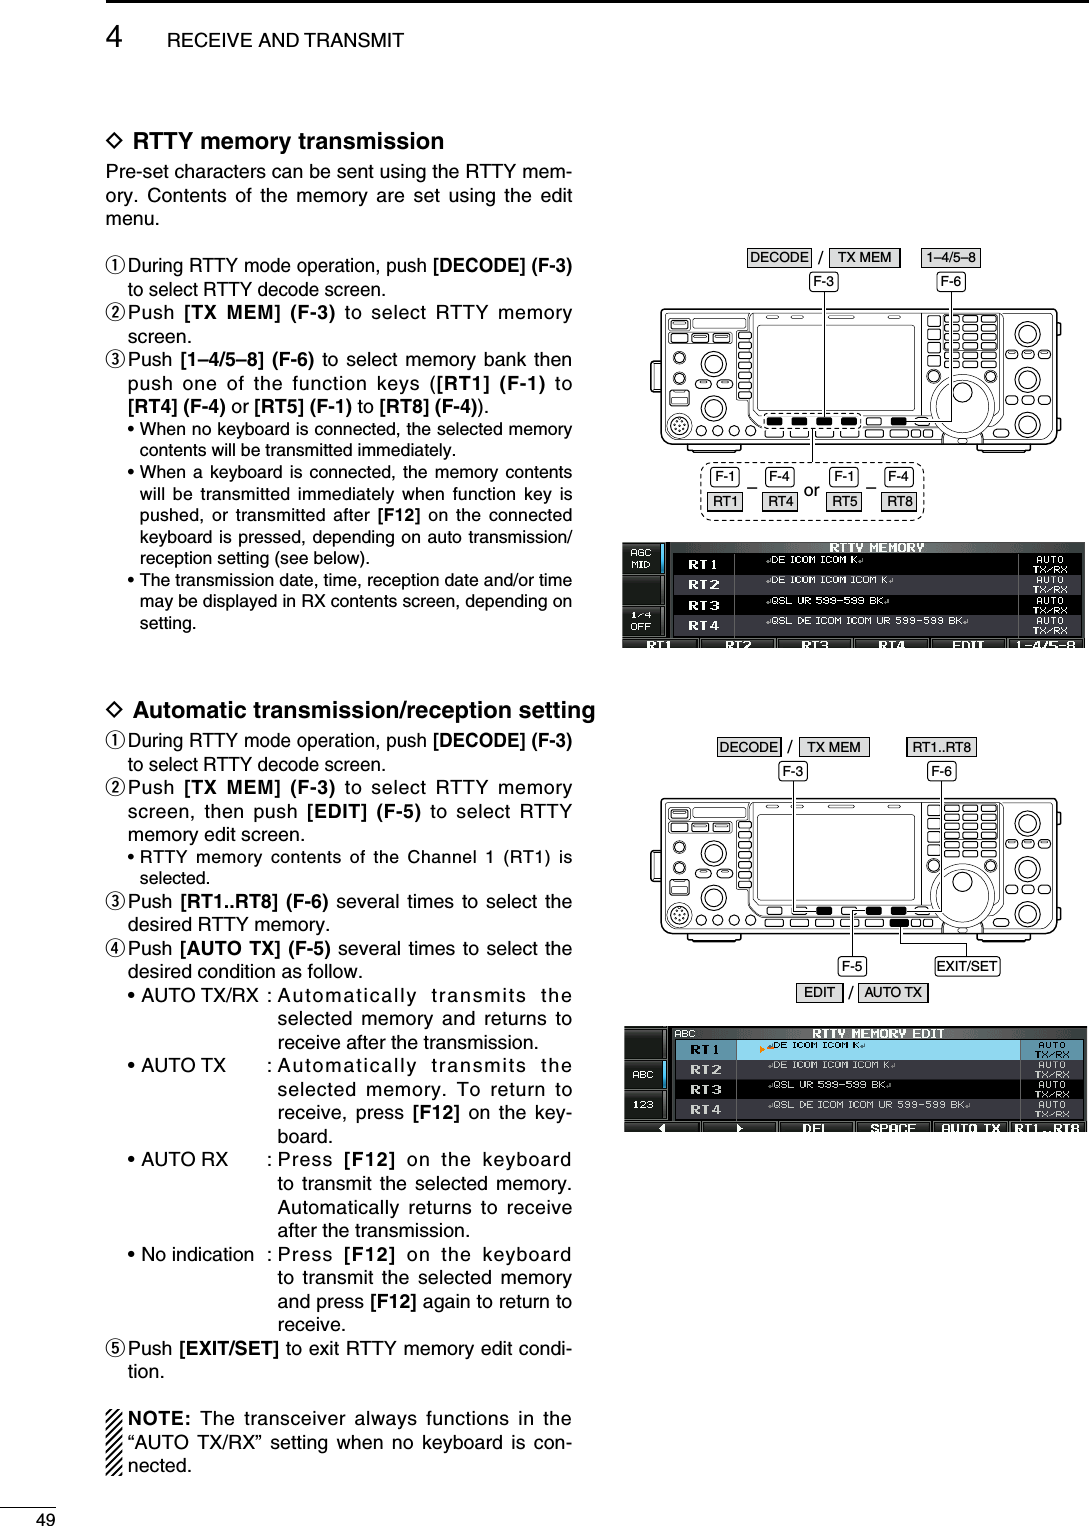 D RTTY memory transmissionPre-set characters can be sent using the RTTY mem-ory. Contents of the memory are set using the edit menu.q  During RTTY mode operation, push [DECODE] (F-3) to select RTTY decode screen.w  Push  [TX MEM] (F-3) to select RTTY memory screen.e  Push  [1–4/5–8] (F-6) to select memory bank then push one of the function keys ([RT1] (F-1) to  [RT4] (F-4) or [RT5] (F-1) to [RT8] (F-4)).  •  When no keyboard is connected, the selected memory contents will be transmitted immediately. •  When a keyboard is connected, the memory contents will be transmitted immediately when function key is pushed, or transmitted after [F12] on the connected keyboard is pressed, depending on auto transmission/reception setting (see below). •  The transmission date, time, reception date and/or time may be displayed in RX contents screen, depending on setting.orF-3 F-6–F-1 F-4RT1 RT4 –F-1 F-4RT5 RT8/DECODE TX MEM 1–4/5–8D Automatic transmission/reception settingq  During RTTY mode operation, push [DECODE] (F-3) to select RTTY decode screen.w  Push  [TX MEM] (F-3) to select RTTY memory screen, then push [EDIT] (F-5) to select RTTY memory edit screen. •  RTTY memory contents of the Channel 1 (RT1) is selected.e  Push  [RT1..RT8] (F-6) several times to select the desired RTTY memory.r  Push [AUTO TX] (F-5) several times to select the desired condition as follow.  • AUTO TX/RX :  Automatically transmits the selected memory and returns to receive after the transmission.  • AUTO TX  :  Automatically transmits the selected memory. To return to receive, press [F12] on the key-board.  • AUTO RX  :  Press  [F12] on the keyboard to transmit the selected memory. Automatically returns to receive after the transmission.  • No indication  :  Press  [F12] on the keyboard to transmit the selected memory and press [F12] again to return to receive.t  Push [EXIT/SET] to exit RTTY memory edit condi-tion. NOTE:  The transceiver always functions in the “AUTO TX/RX” setting when no keyboard is con-nected. EXIT/SETF-3 F-6F-5/DECODE TX MEMAUTO TXEDIT /RT1..RT8494RECEIVE AND TRANSMIT